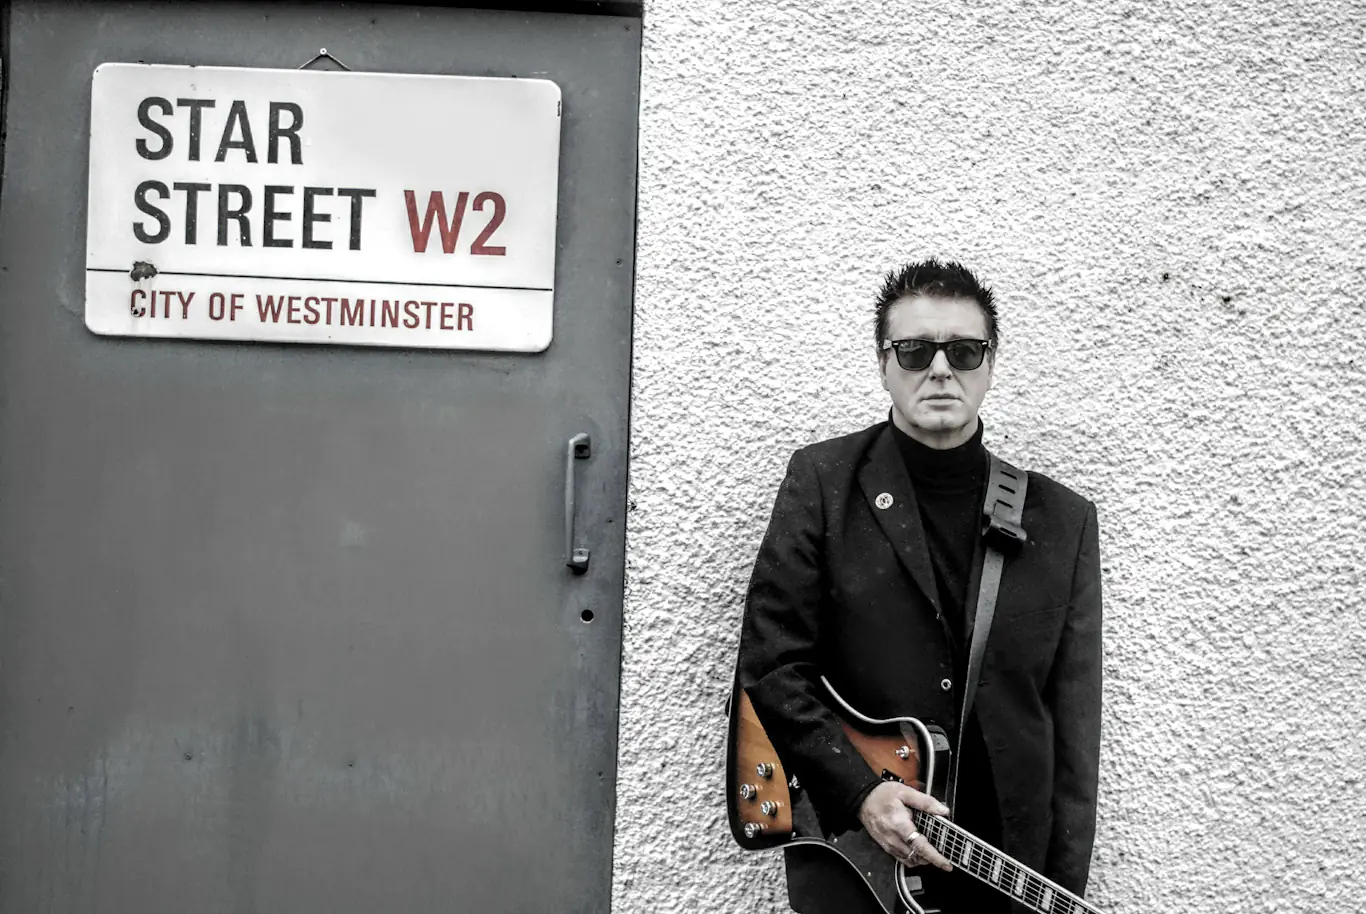 INTERVIEW: Hurricane #1 frontman Alex Lowe on their new album ‘Backstage Waiting to Go On’